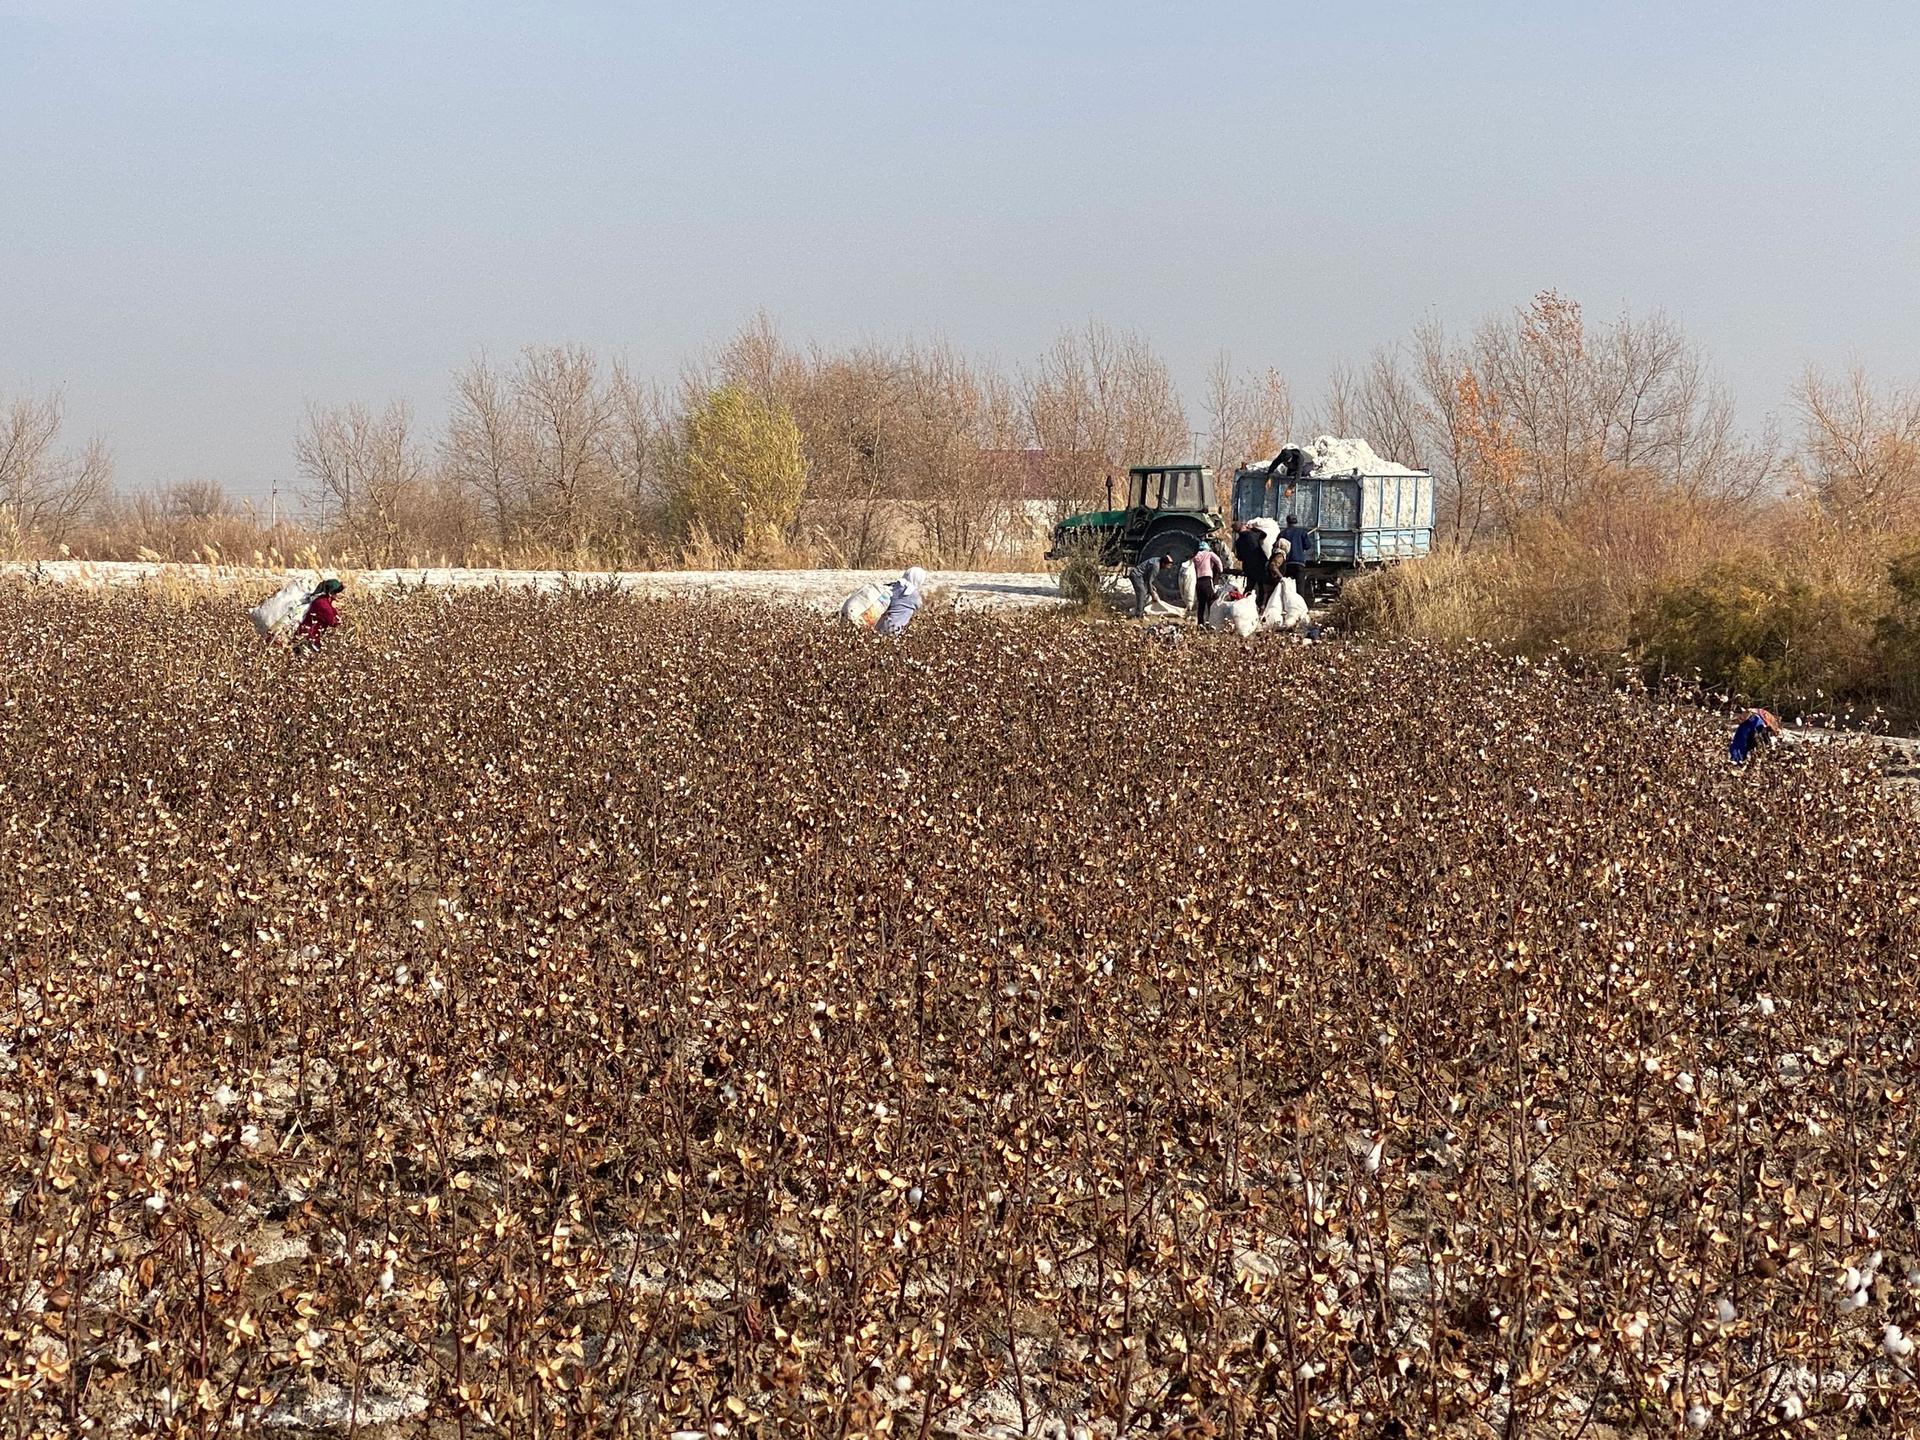 Workers in western Uzbekistan haul large bundles of cotton to a nearby truck.  